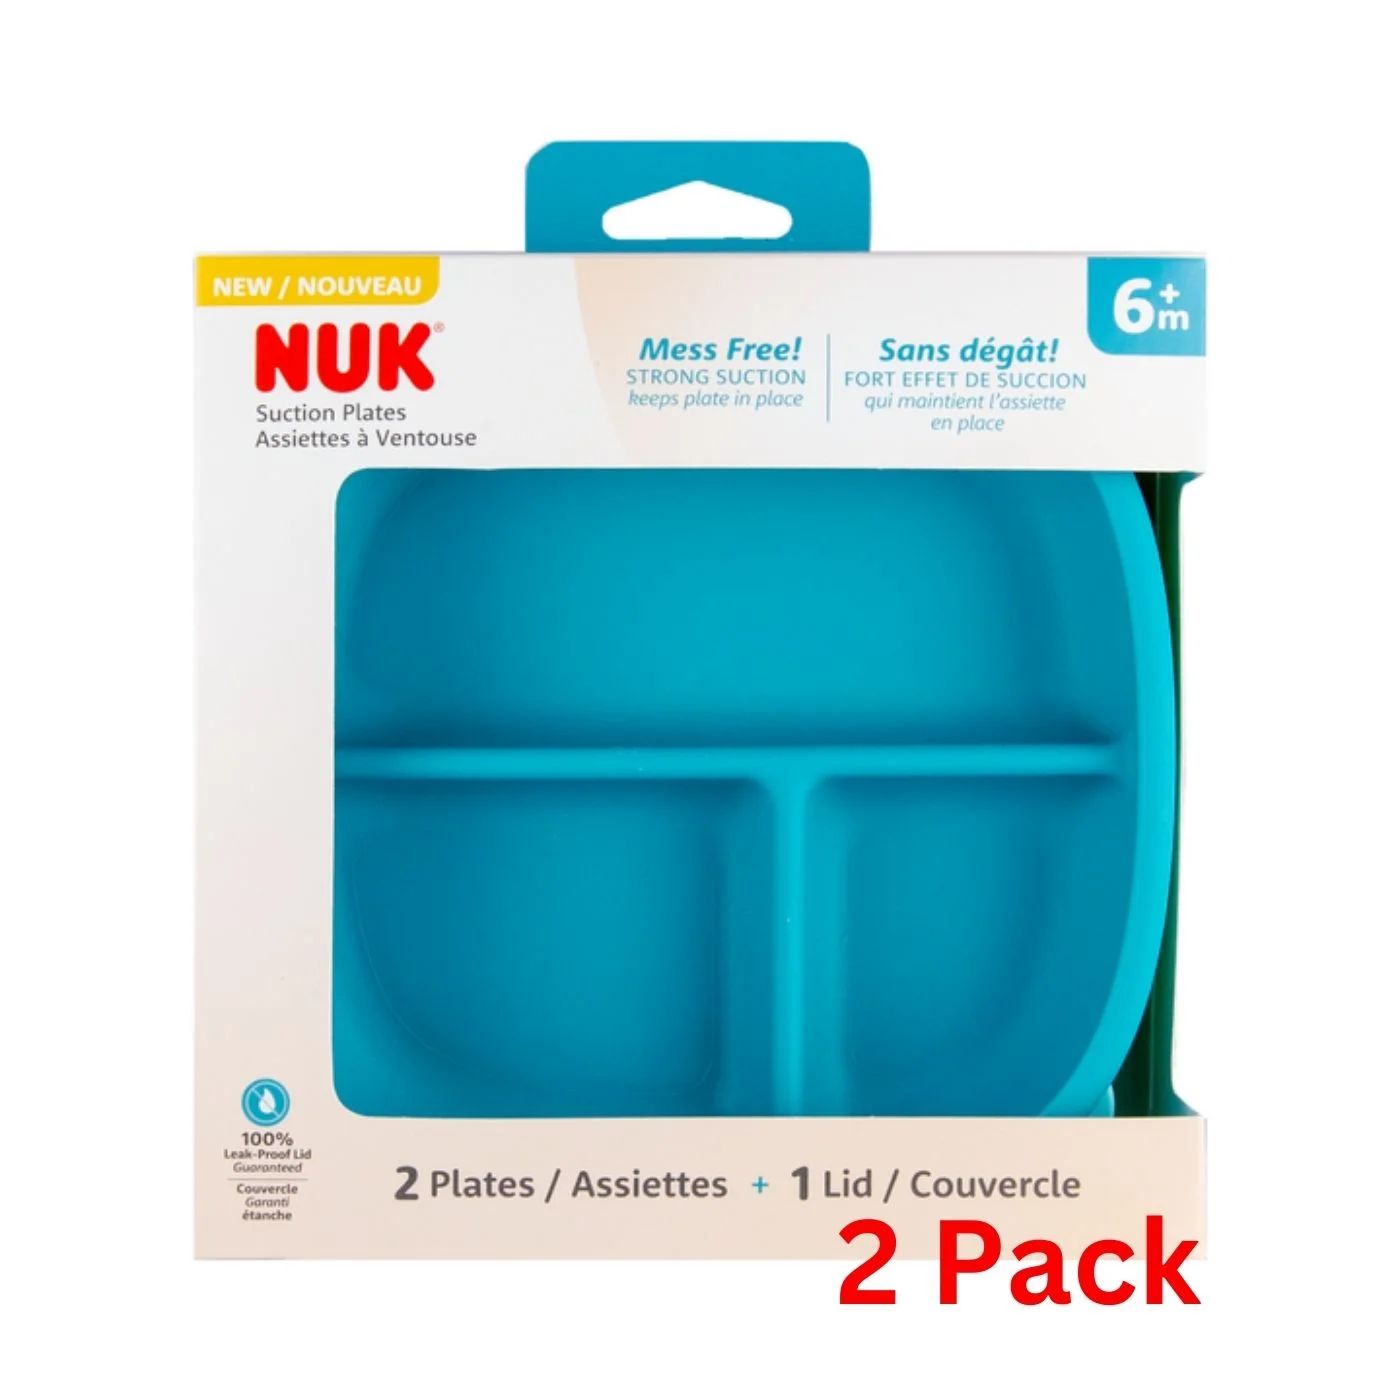 NUK Suction Plates and Lid, Assorted Colors, 2 Pack, 6+ Months | Walmart (US)